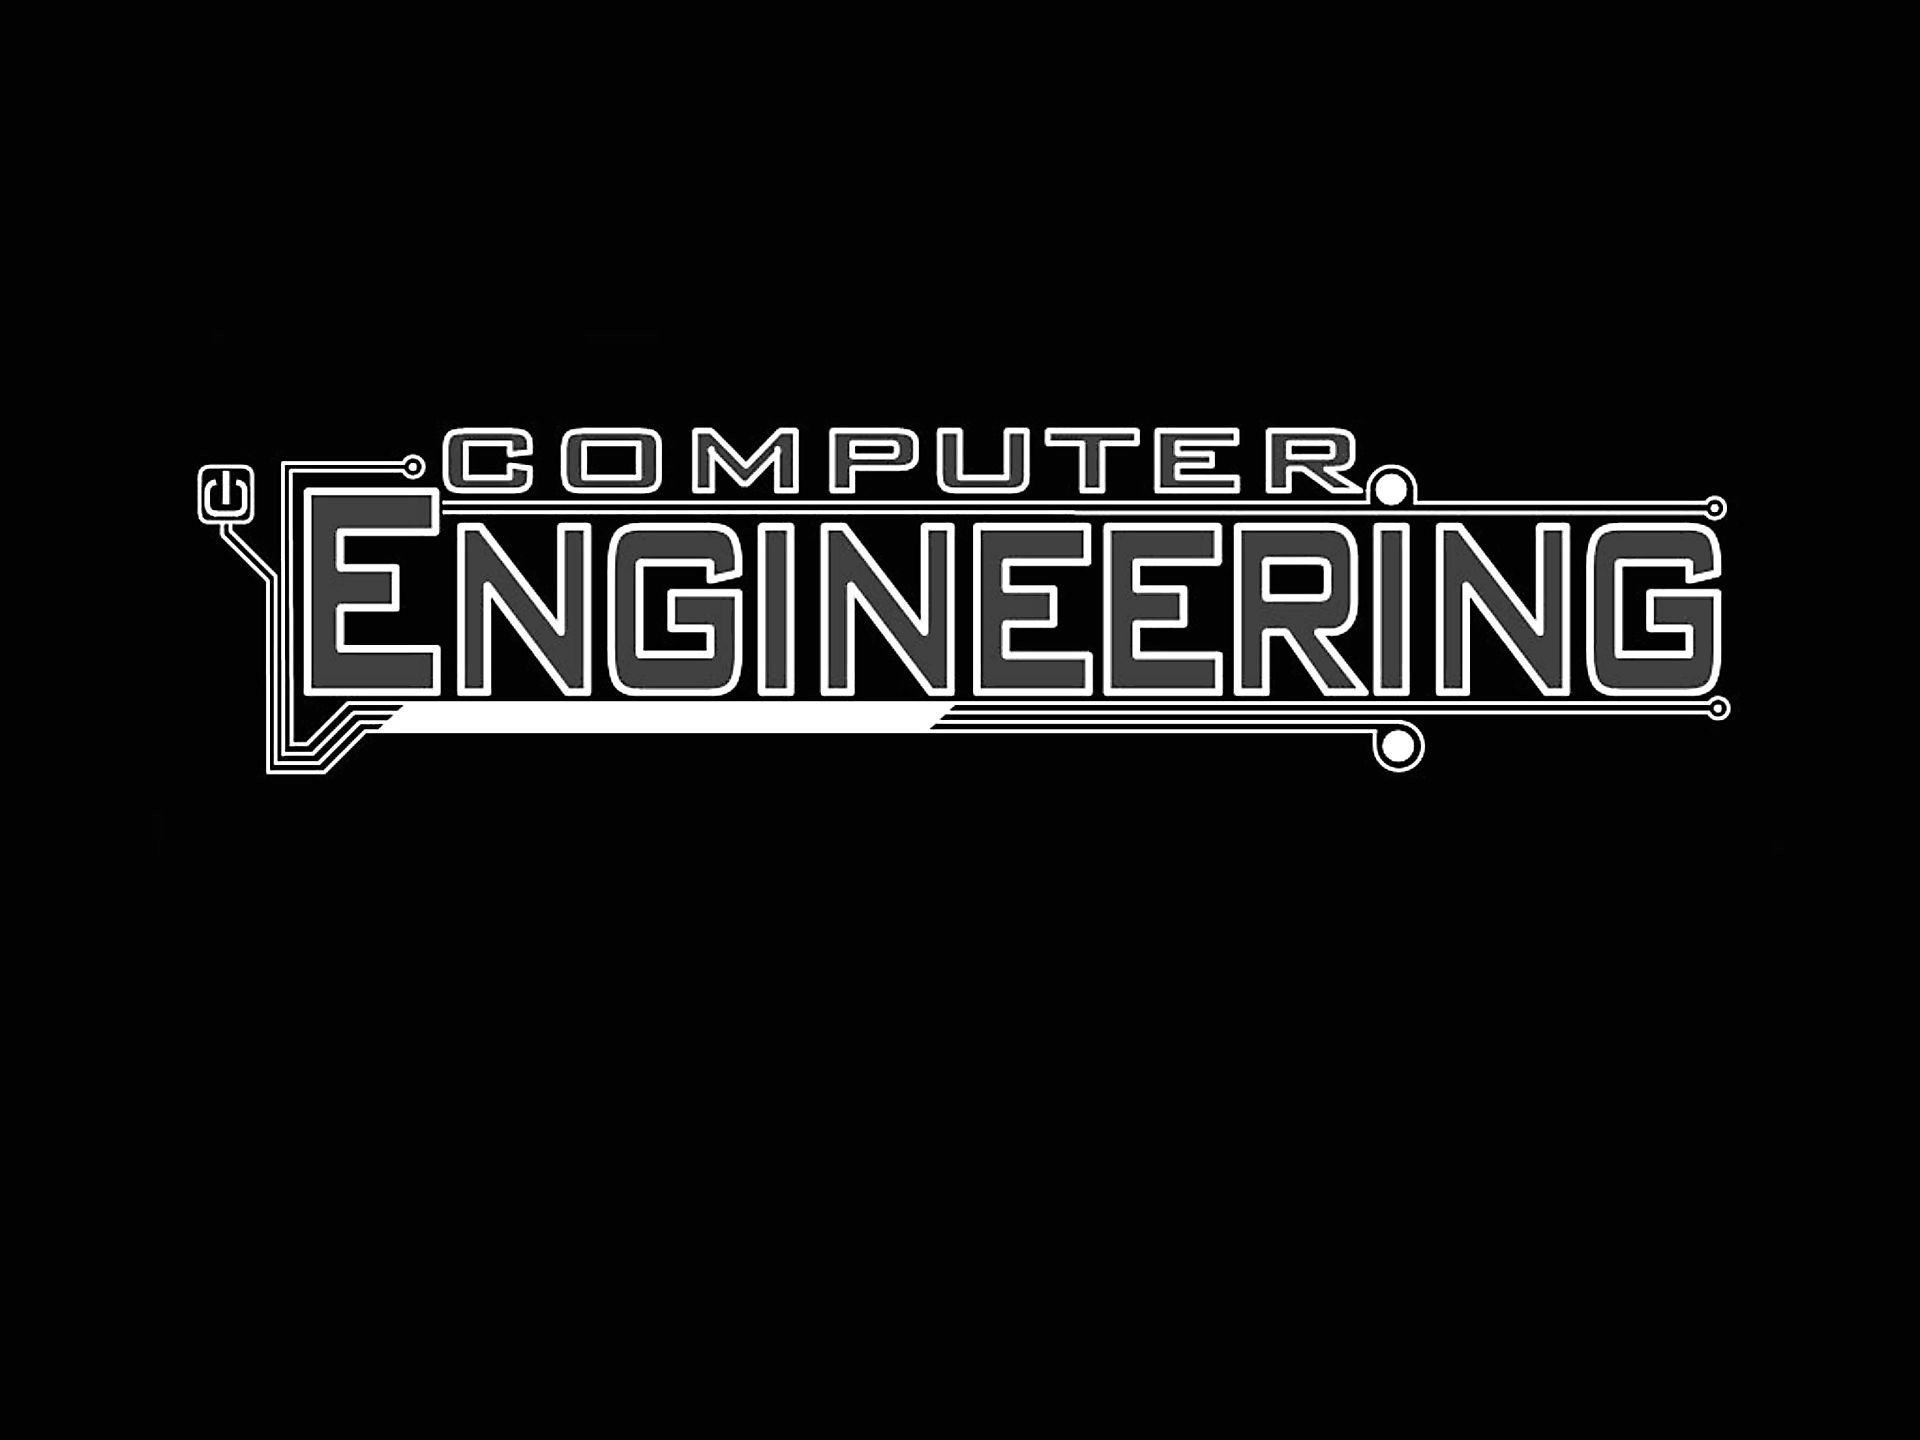 Engineering Wallpaper Images For Computer 69 Images